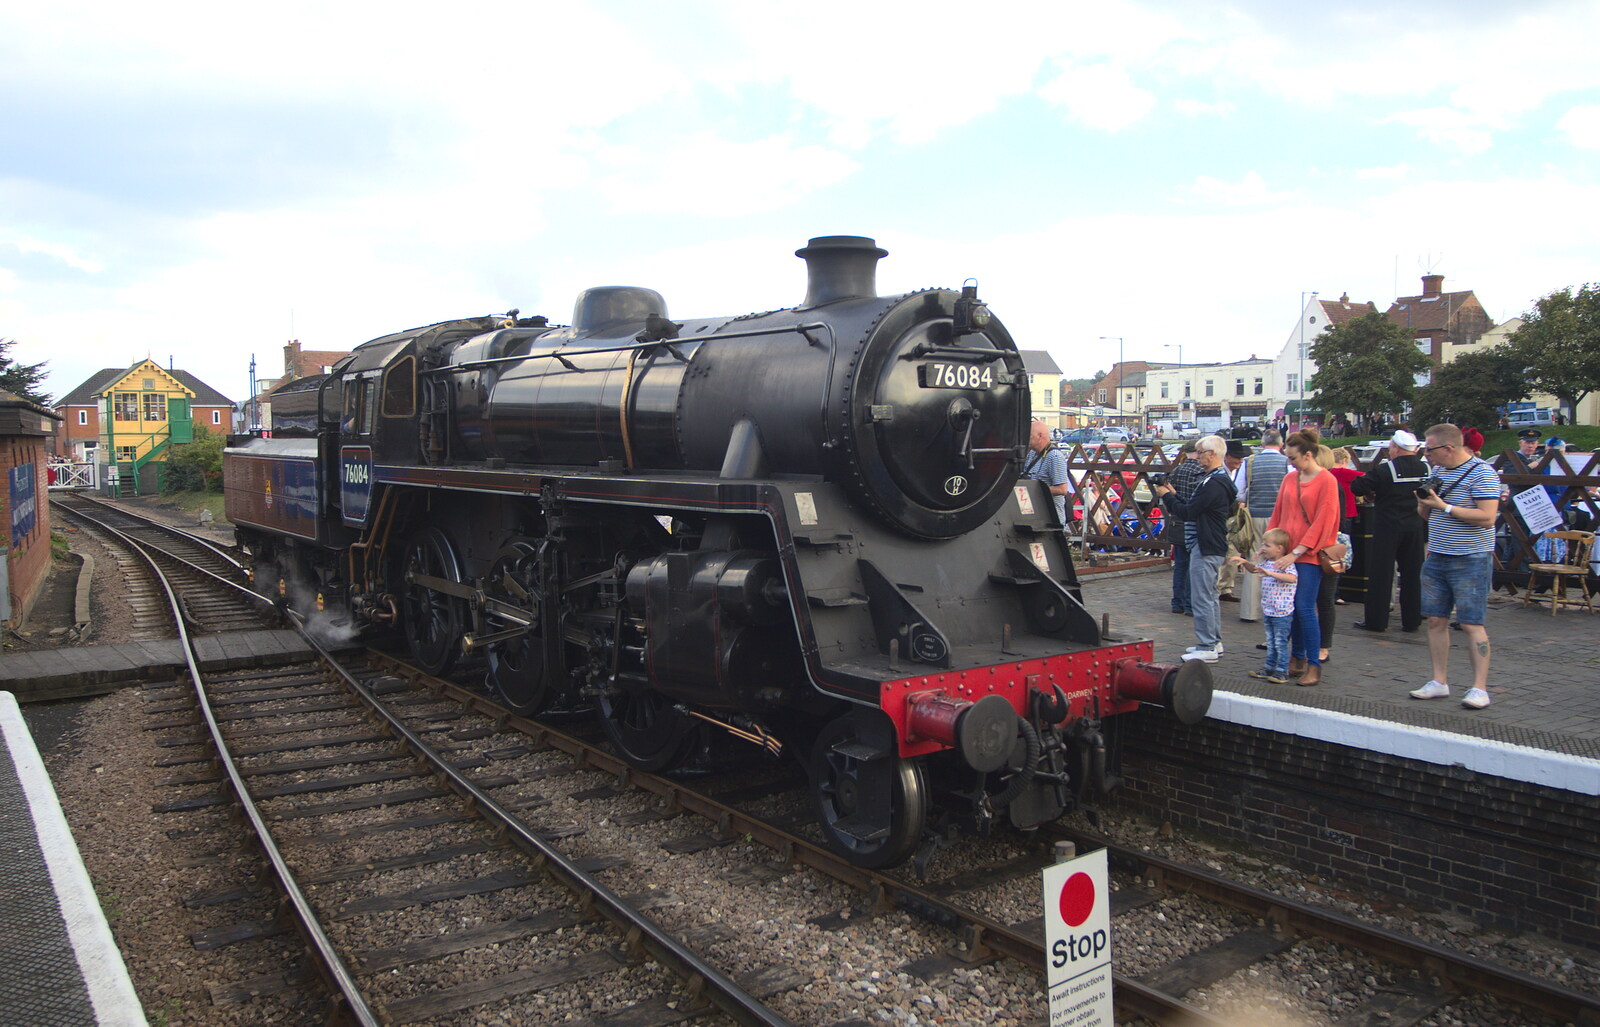 76084 Standard 4 sits at Sheringham from A Steamy 1940s Day Out, Holt and Sheringham, Norfolk - 20th September 2015